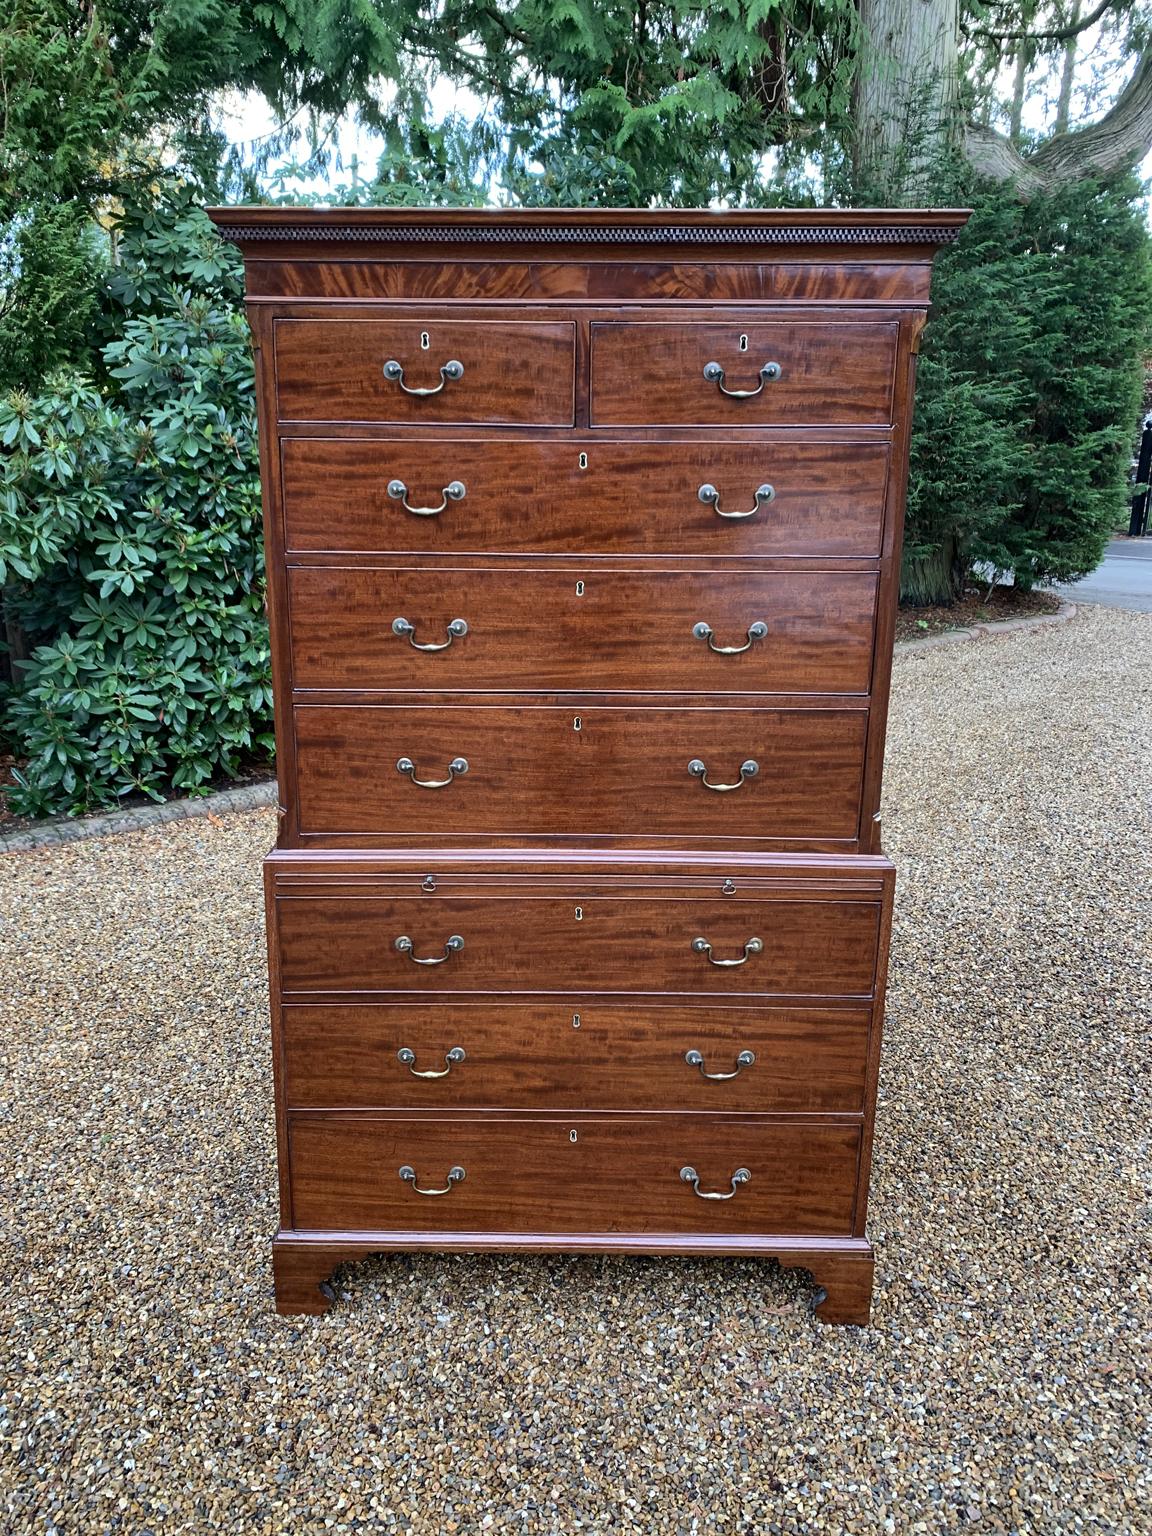 A very high quality 18th century (George III) Mahogany chest on chest (tallboy) with a brushing slide. Two short drawers at the top and six long drawers. Original brass swan neck handles and oak lined drawers. Comes apart in three separate sections